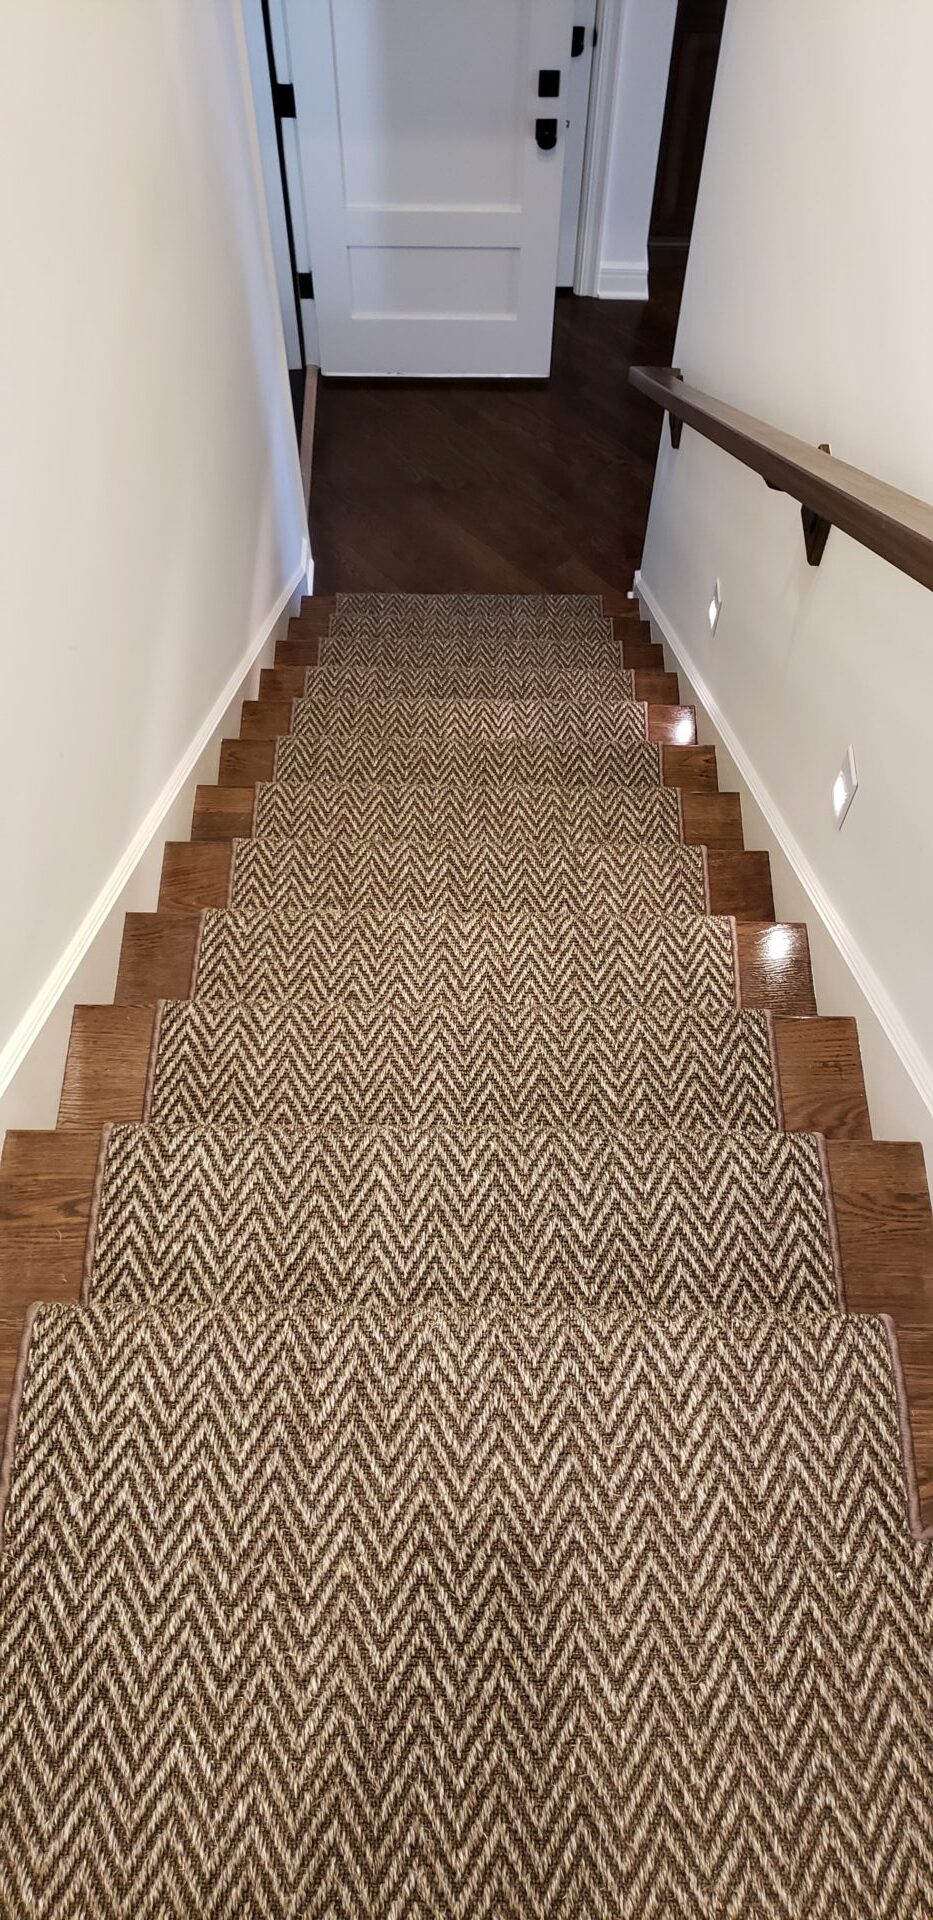 A carpet on the bottom of stairs with wood floors.